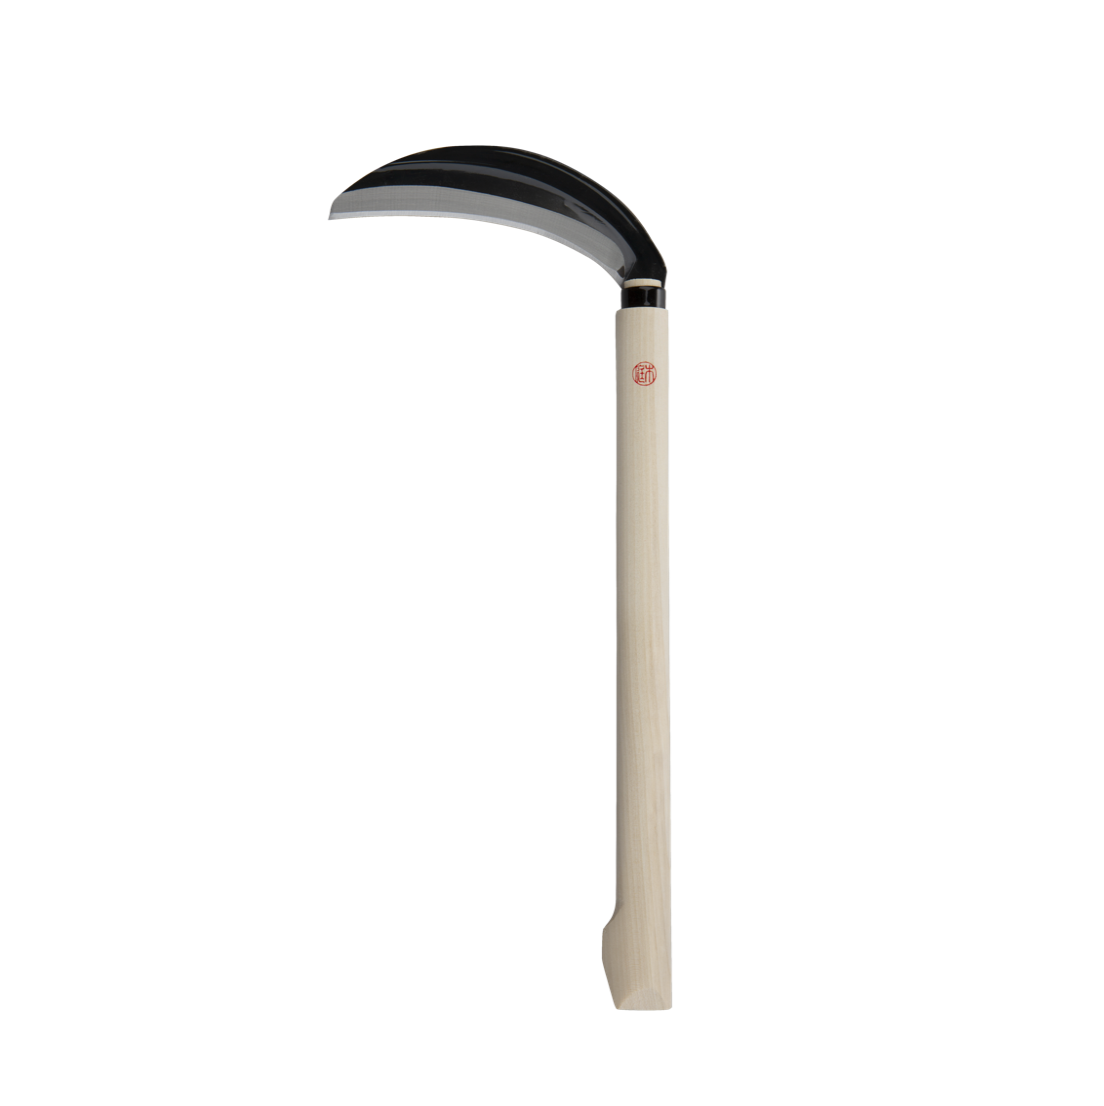 Japanese Sickle - RESTOCK IN MID AUGUST